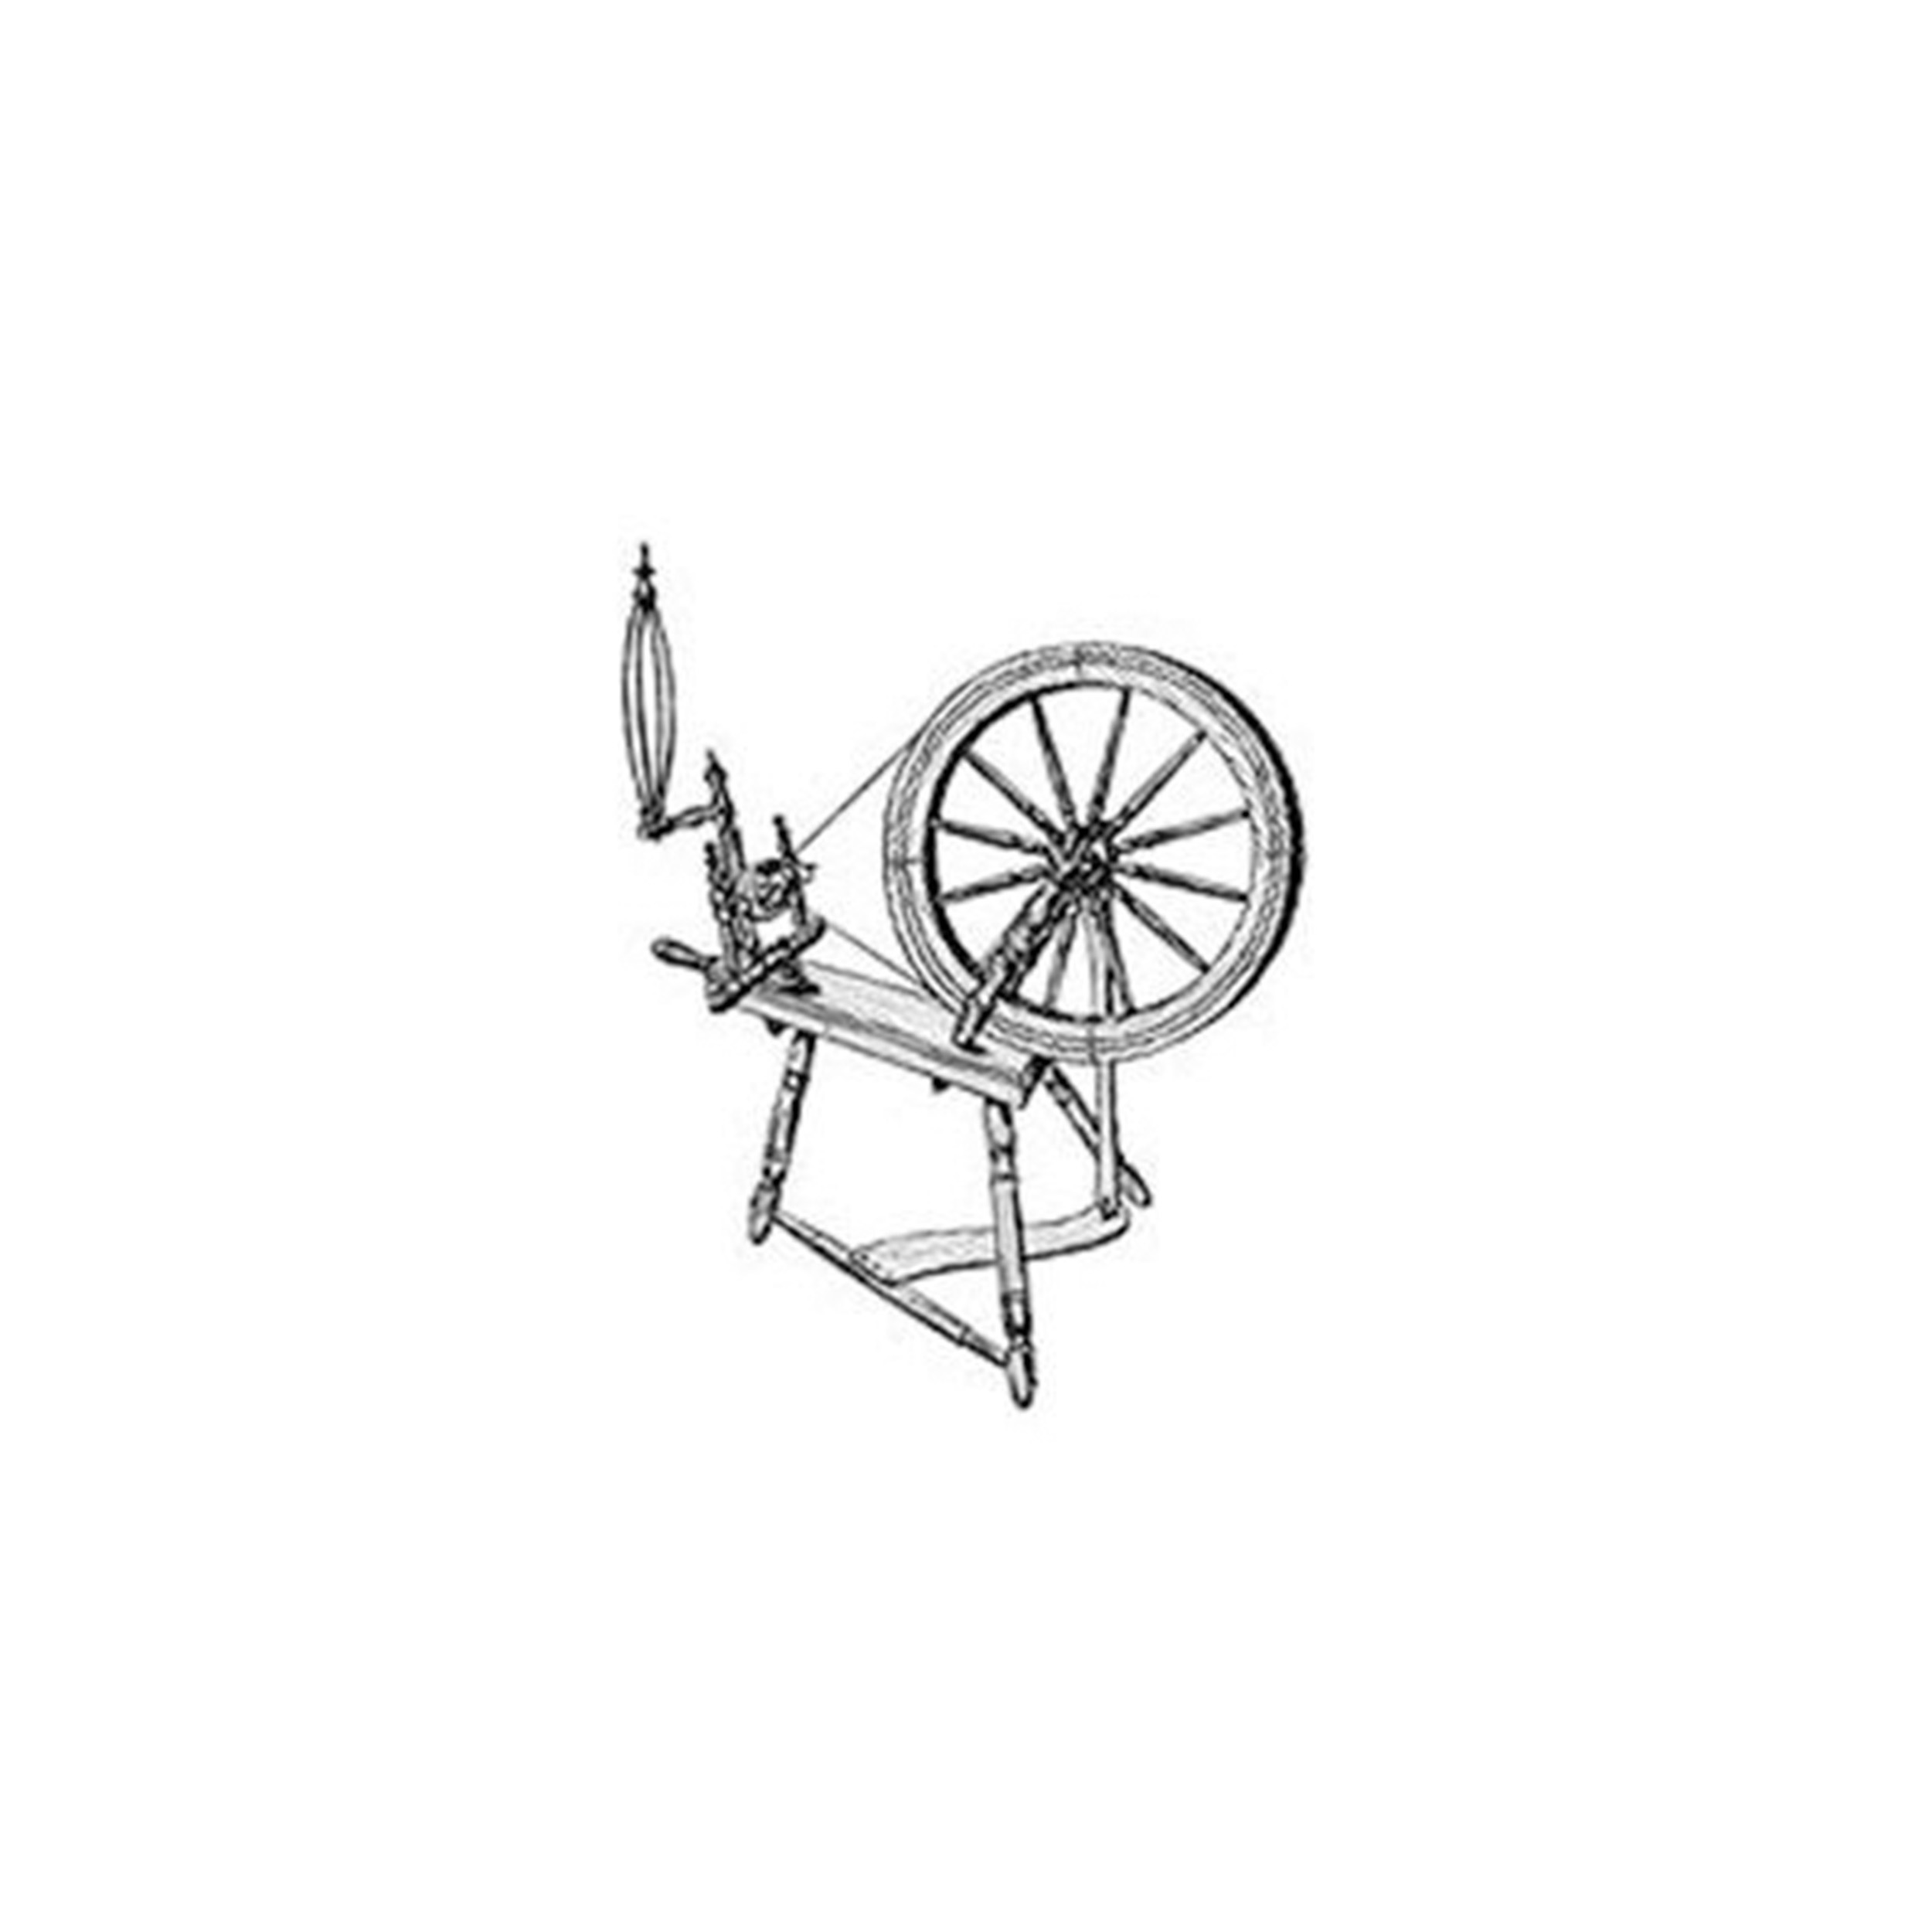 Woodworking Project Paper Plan To Build Large Spinning Wheel